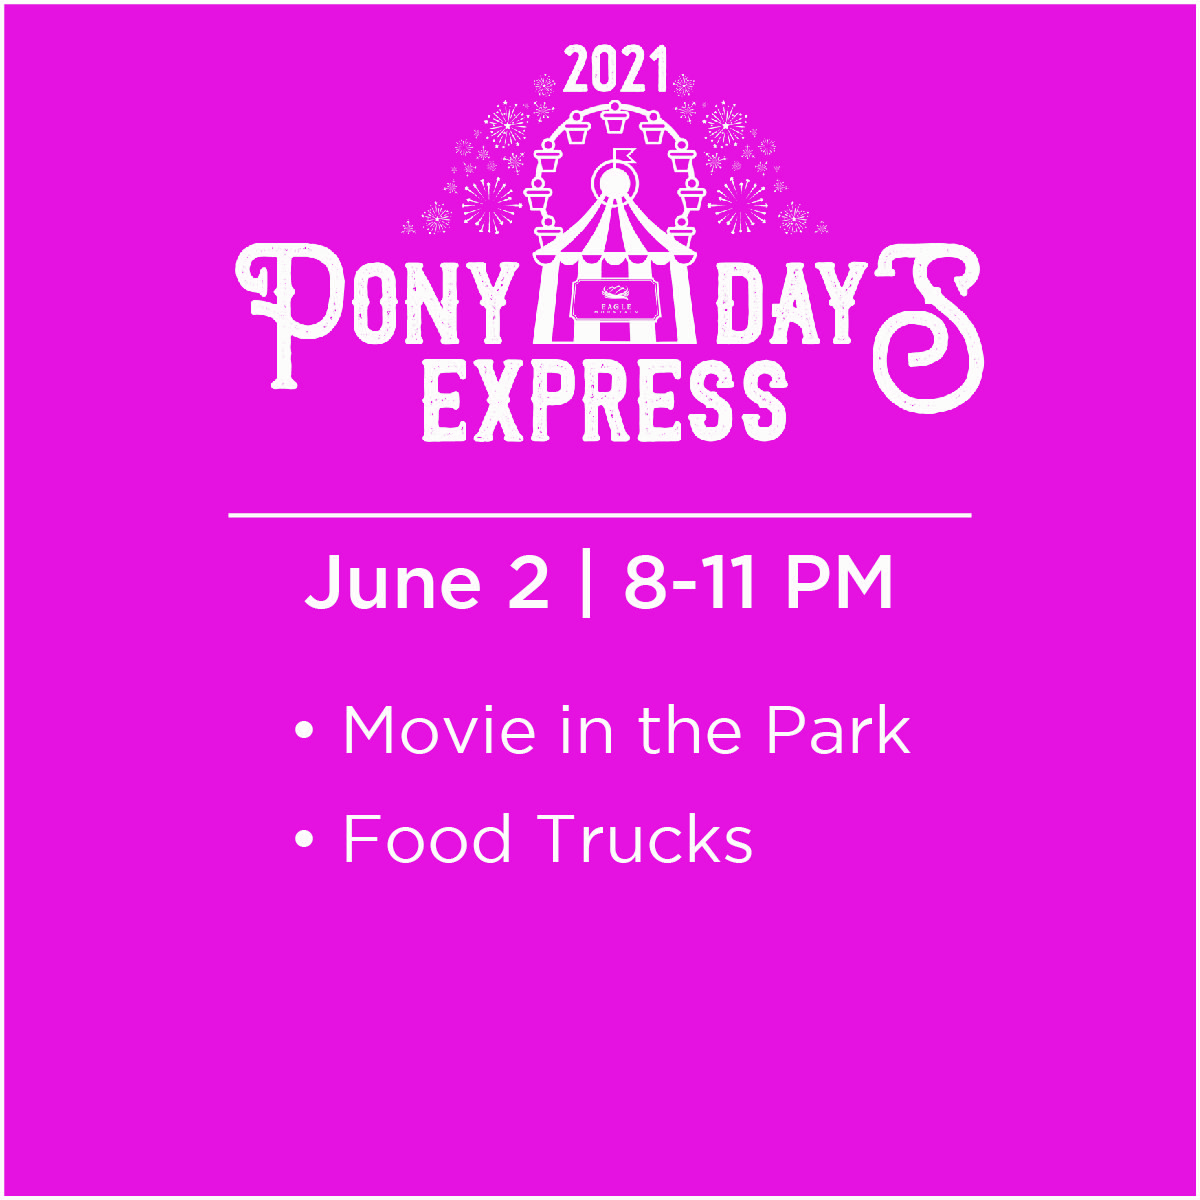 We definitely want to see you there. Join us tomorrow night for a movie in the park at Silverlake Amphitheater. We'll have food trucks available. 